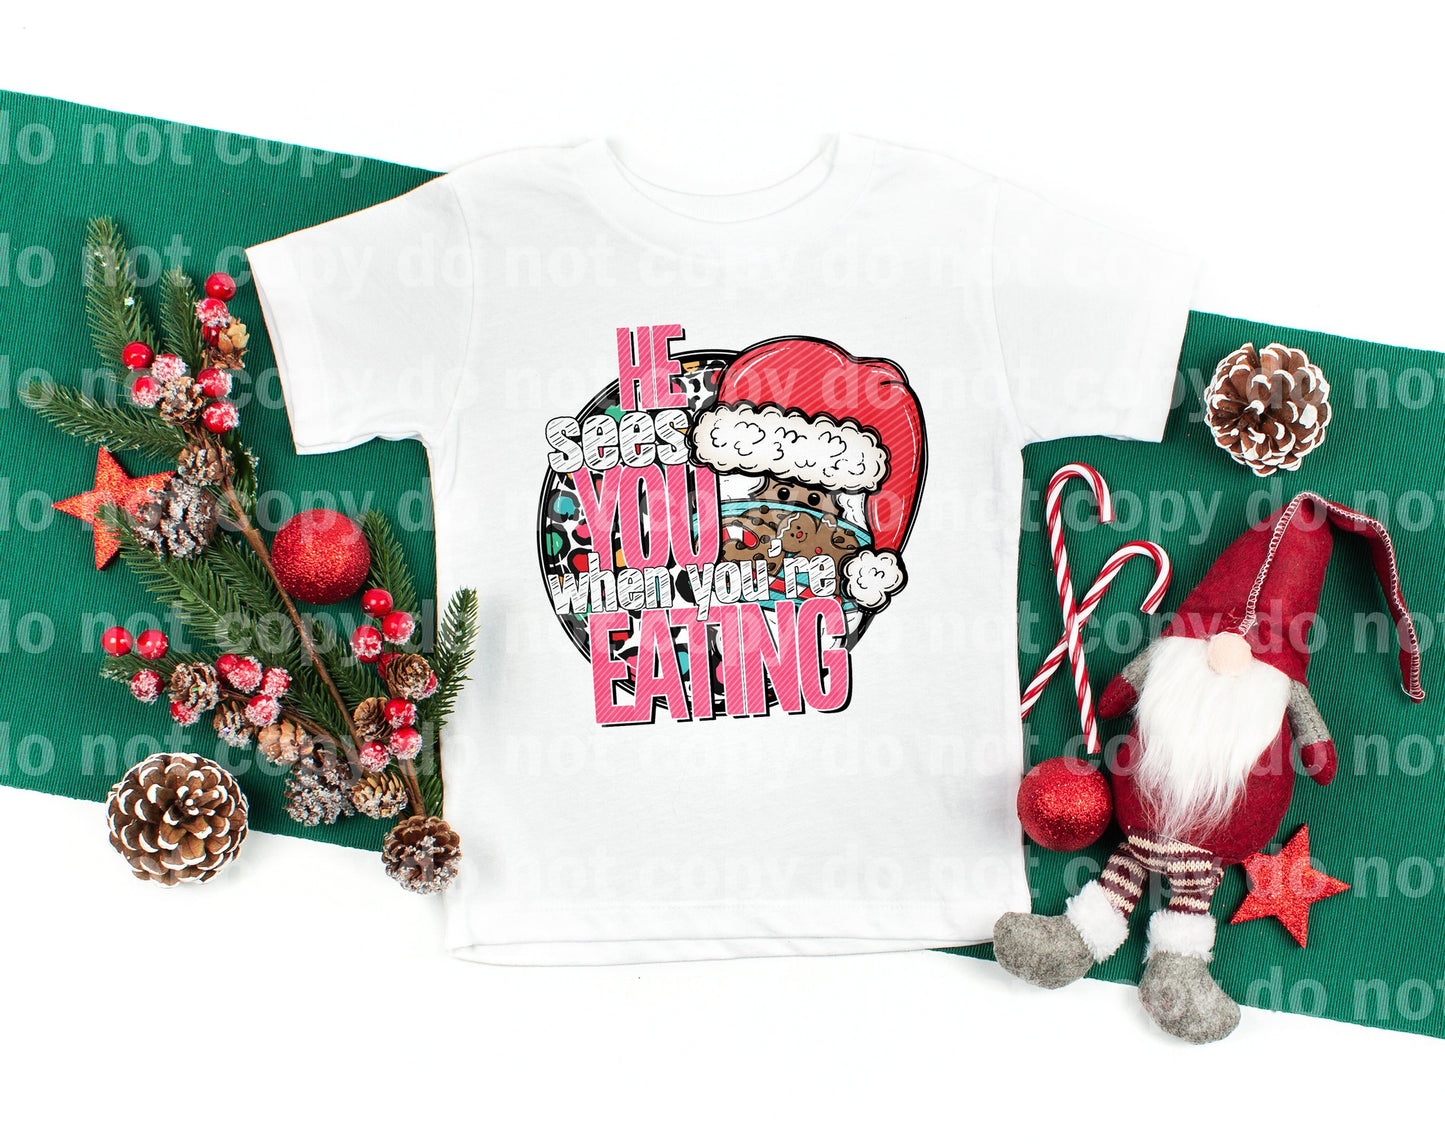 He Sees You When You're Eating Dark Santa Dream Print or Sublimation Print